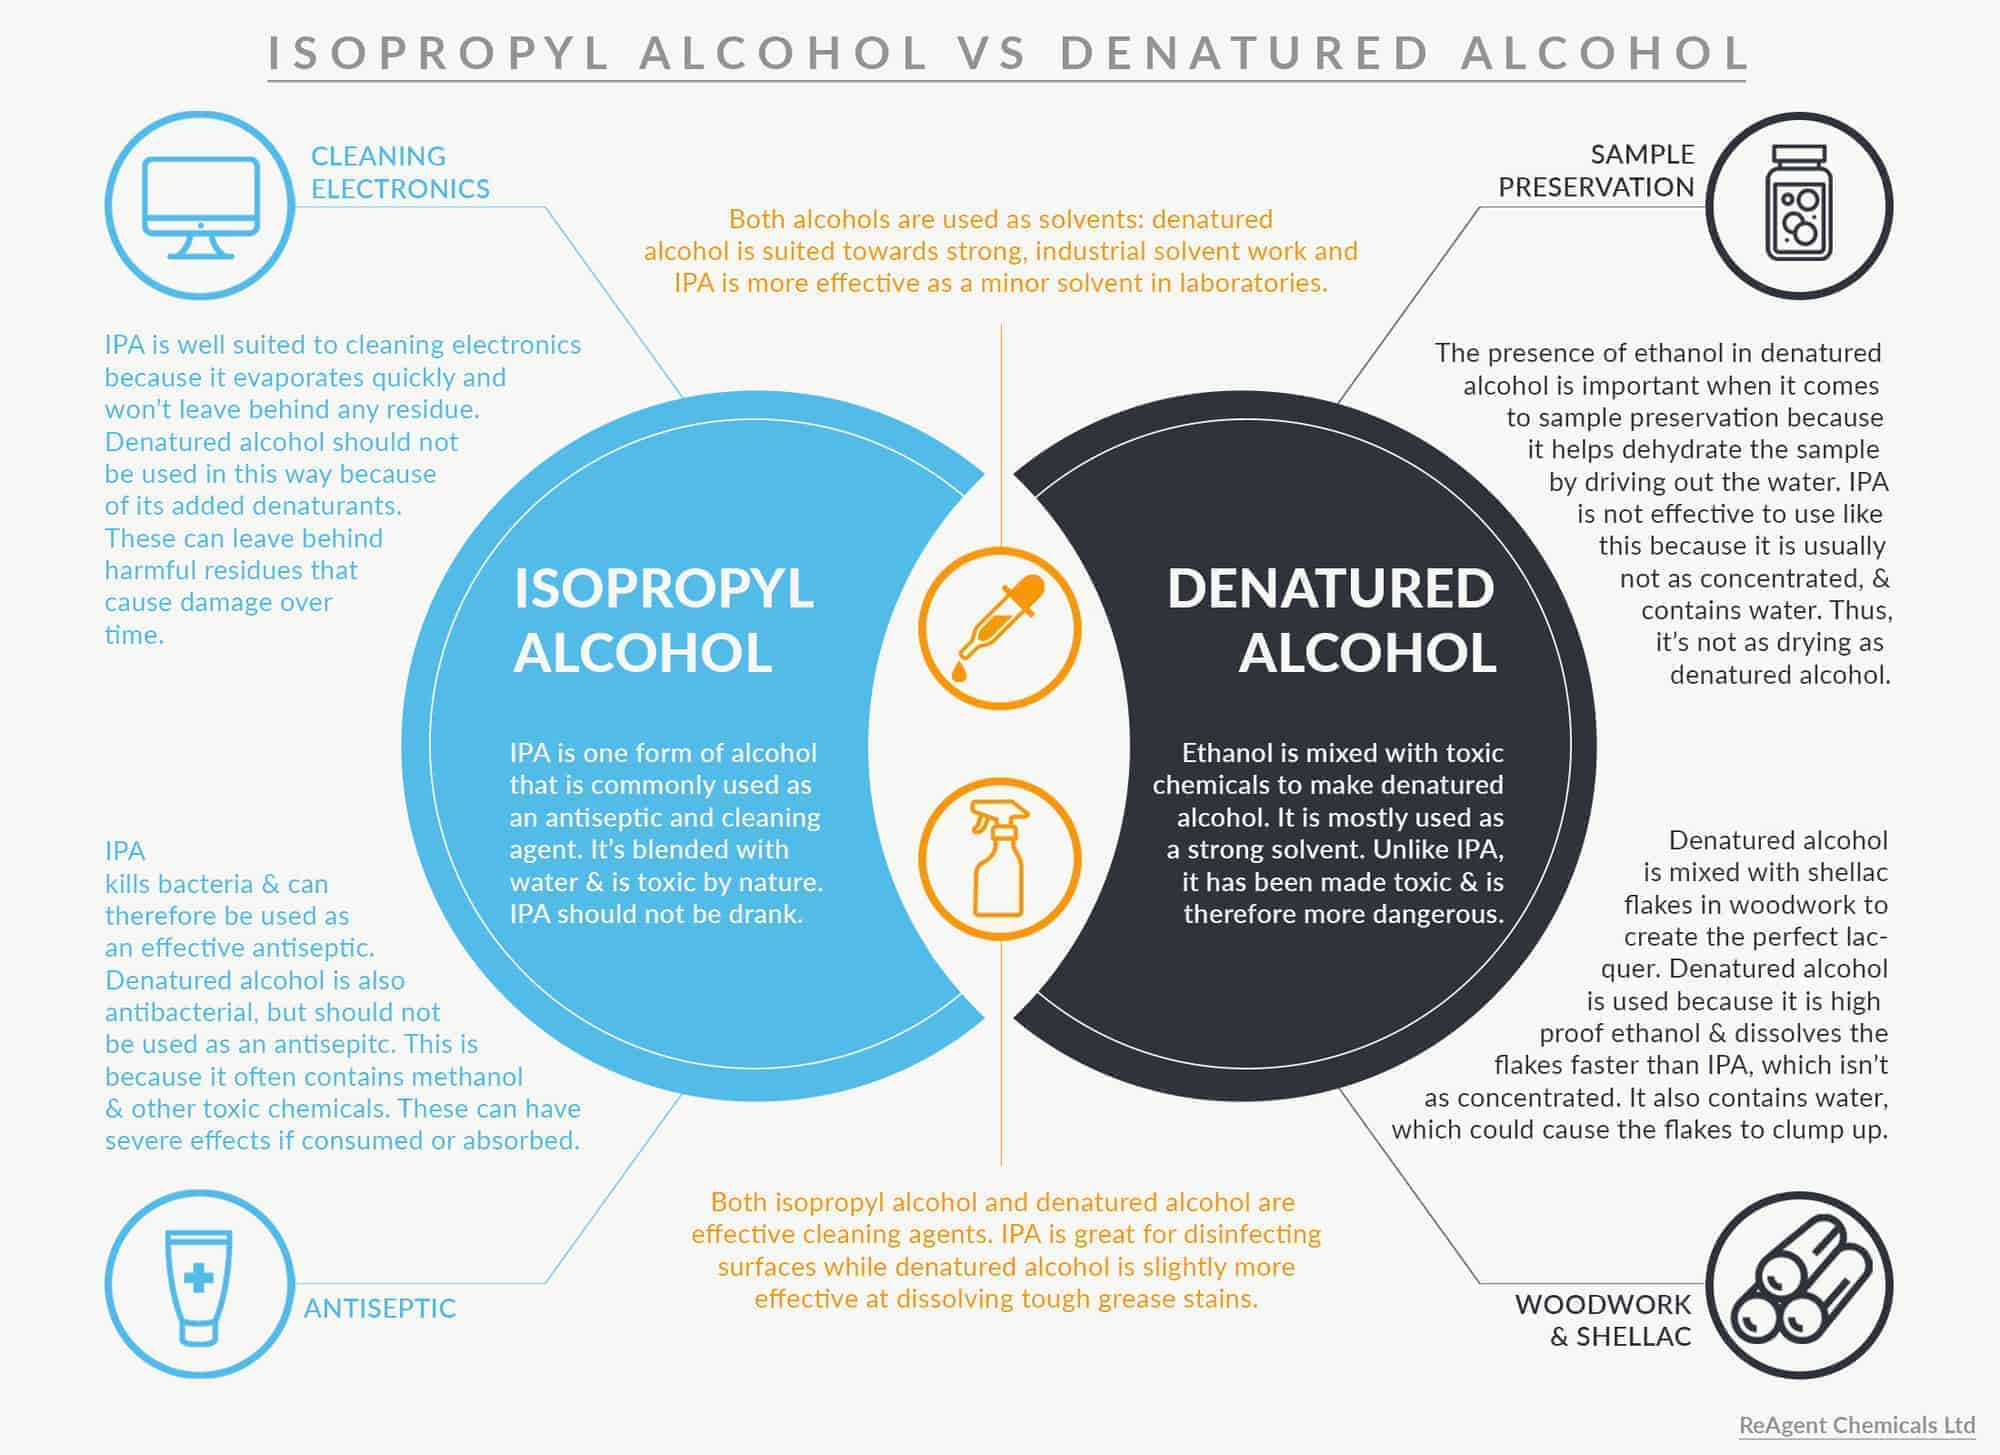 An infographic with a venn diagram showing the different & shared uses of isopropyl alcohol and denatured alcohol